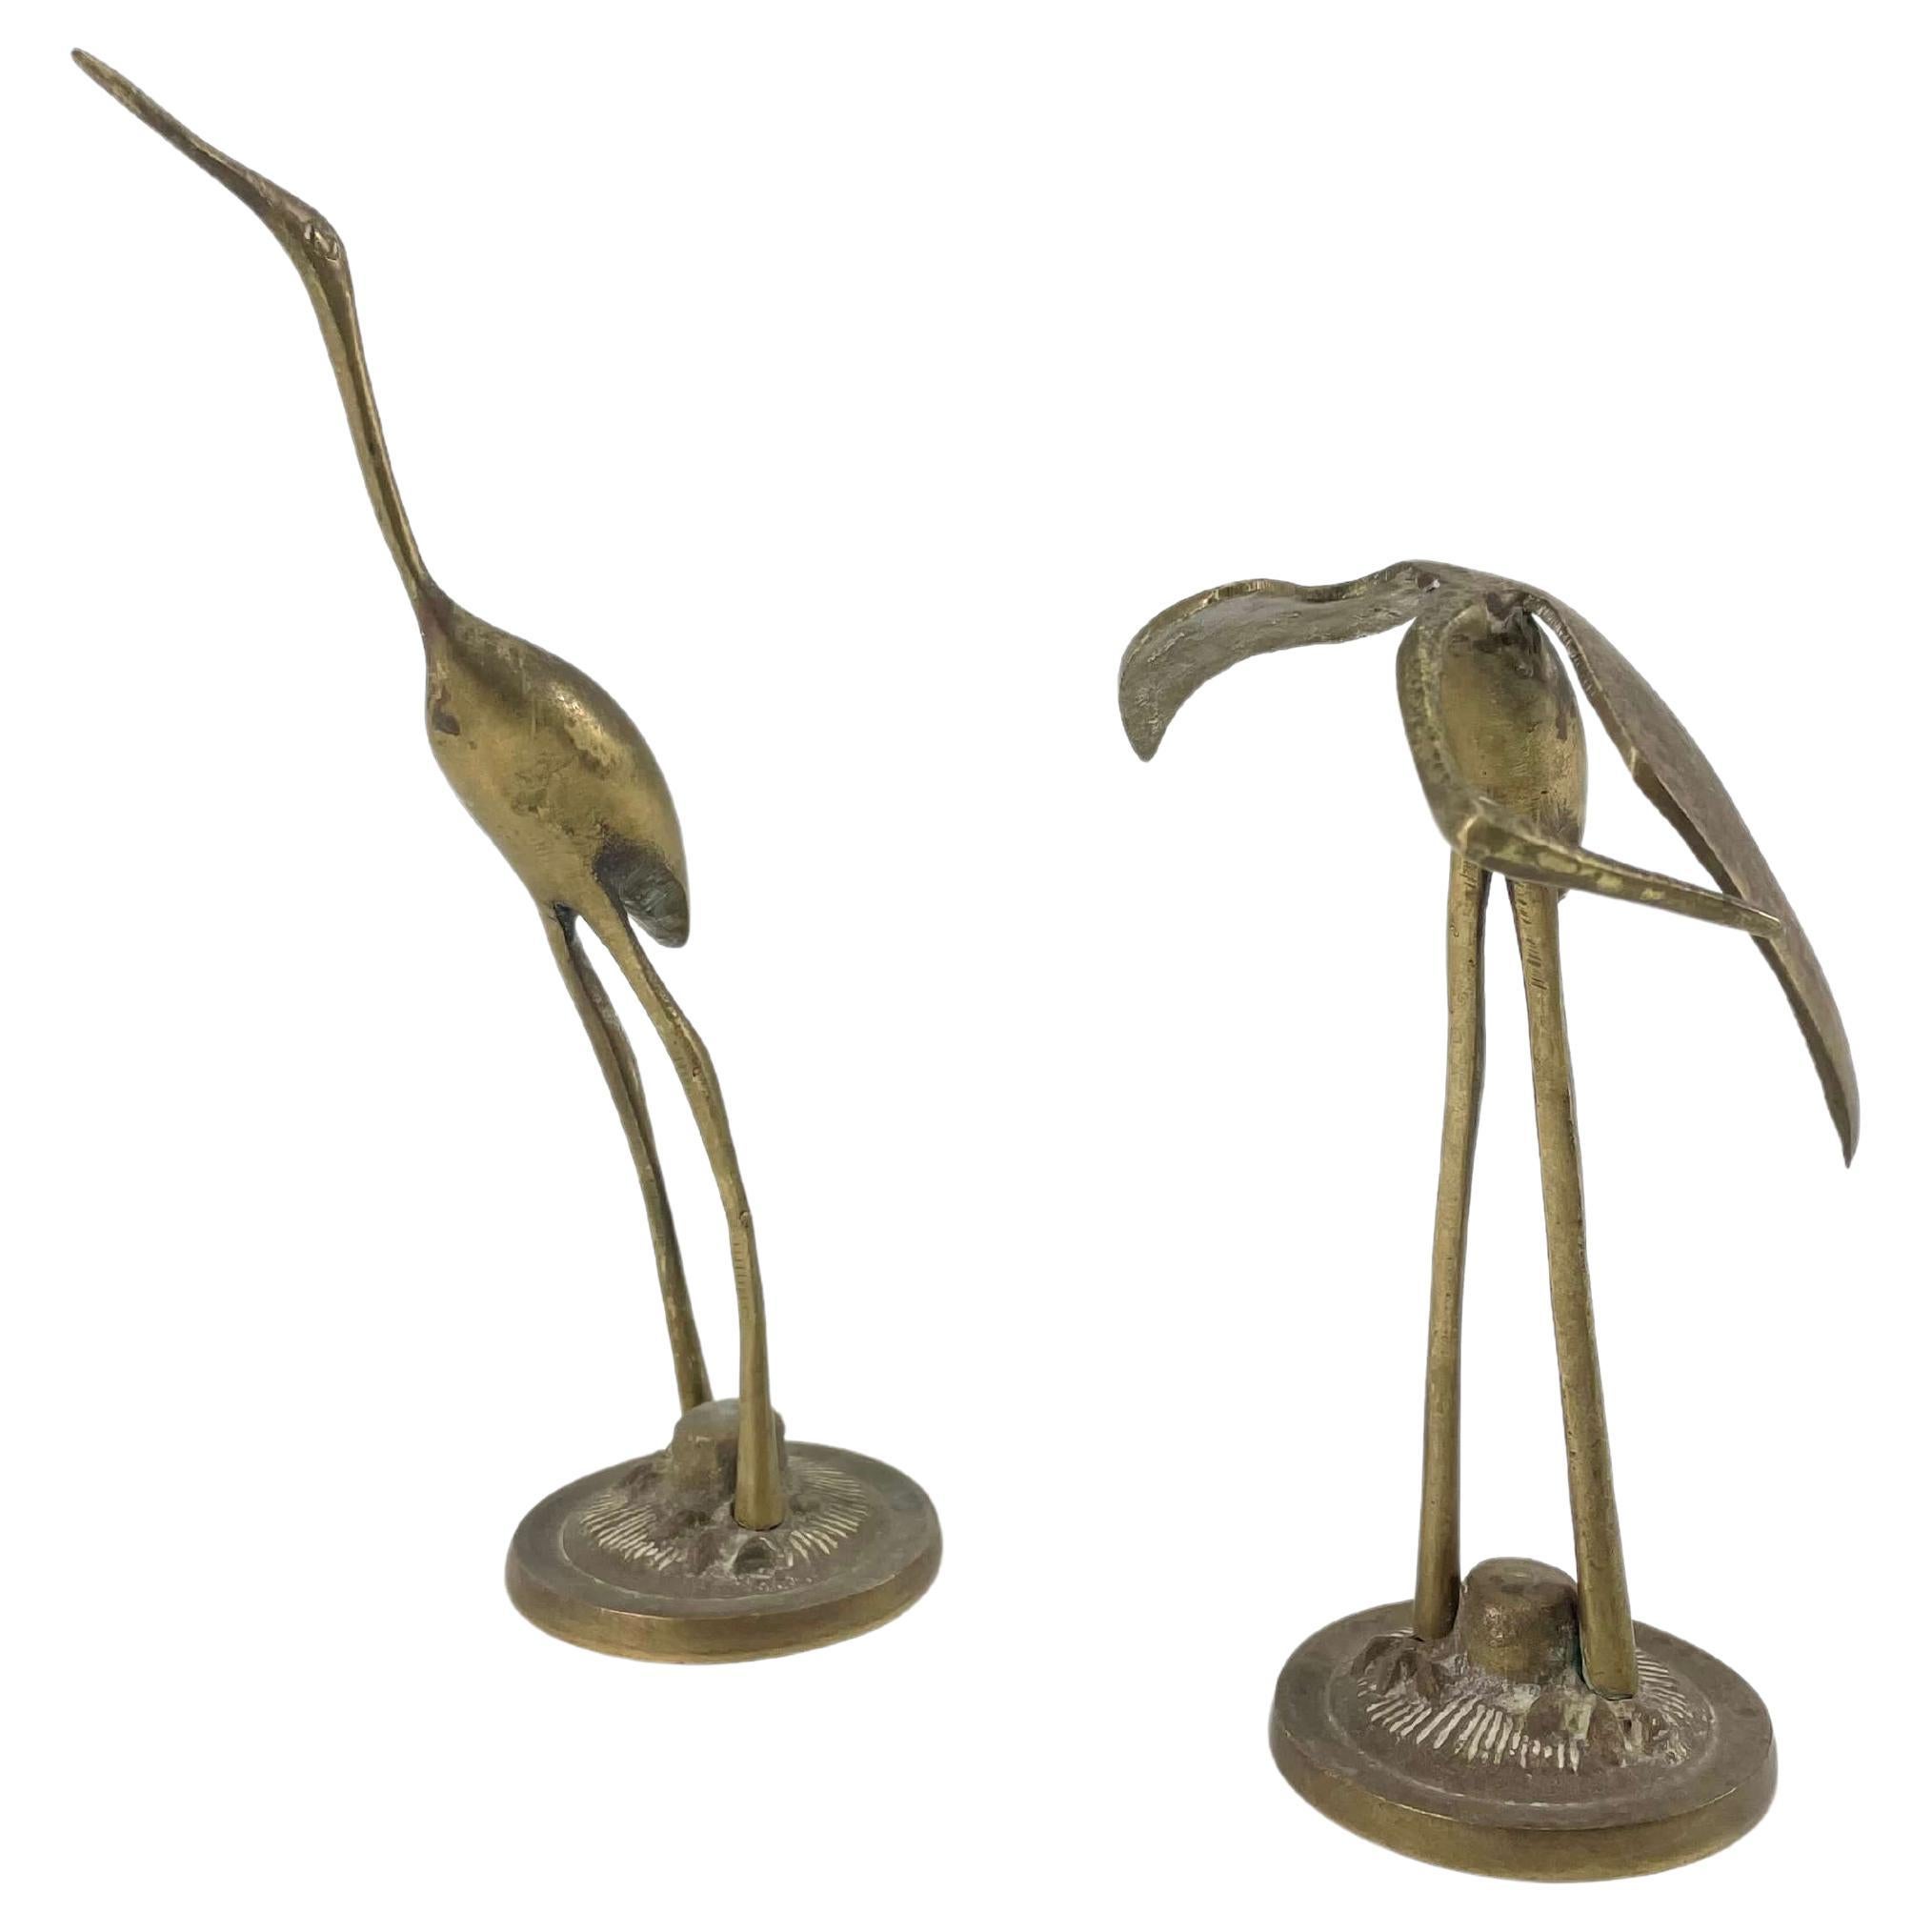 A set of two beautiful vintage brass crane or heron statues. This decorative item would make a beautiful addition to any table or display. Made in the 1960s, this pair display the joy of that great era with a bold, statement. They have a beautiful